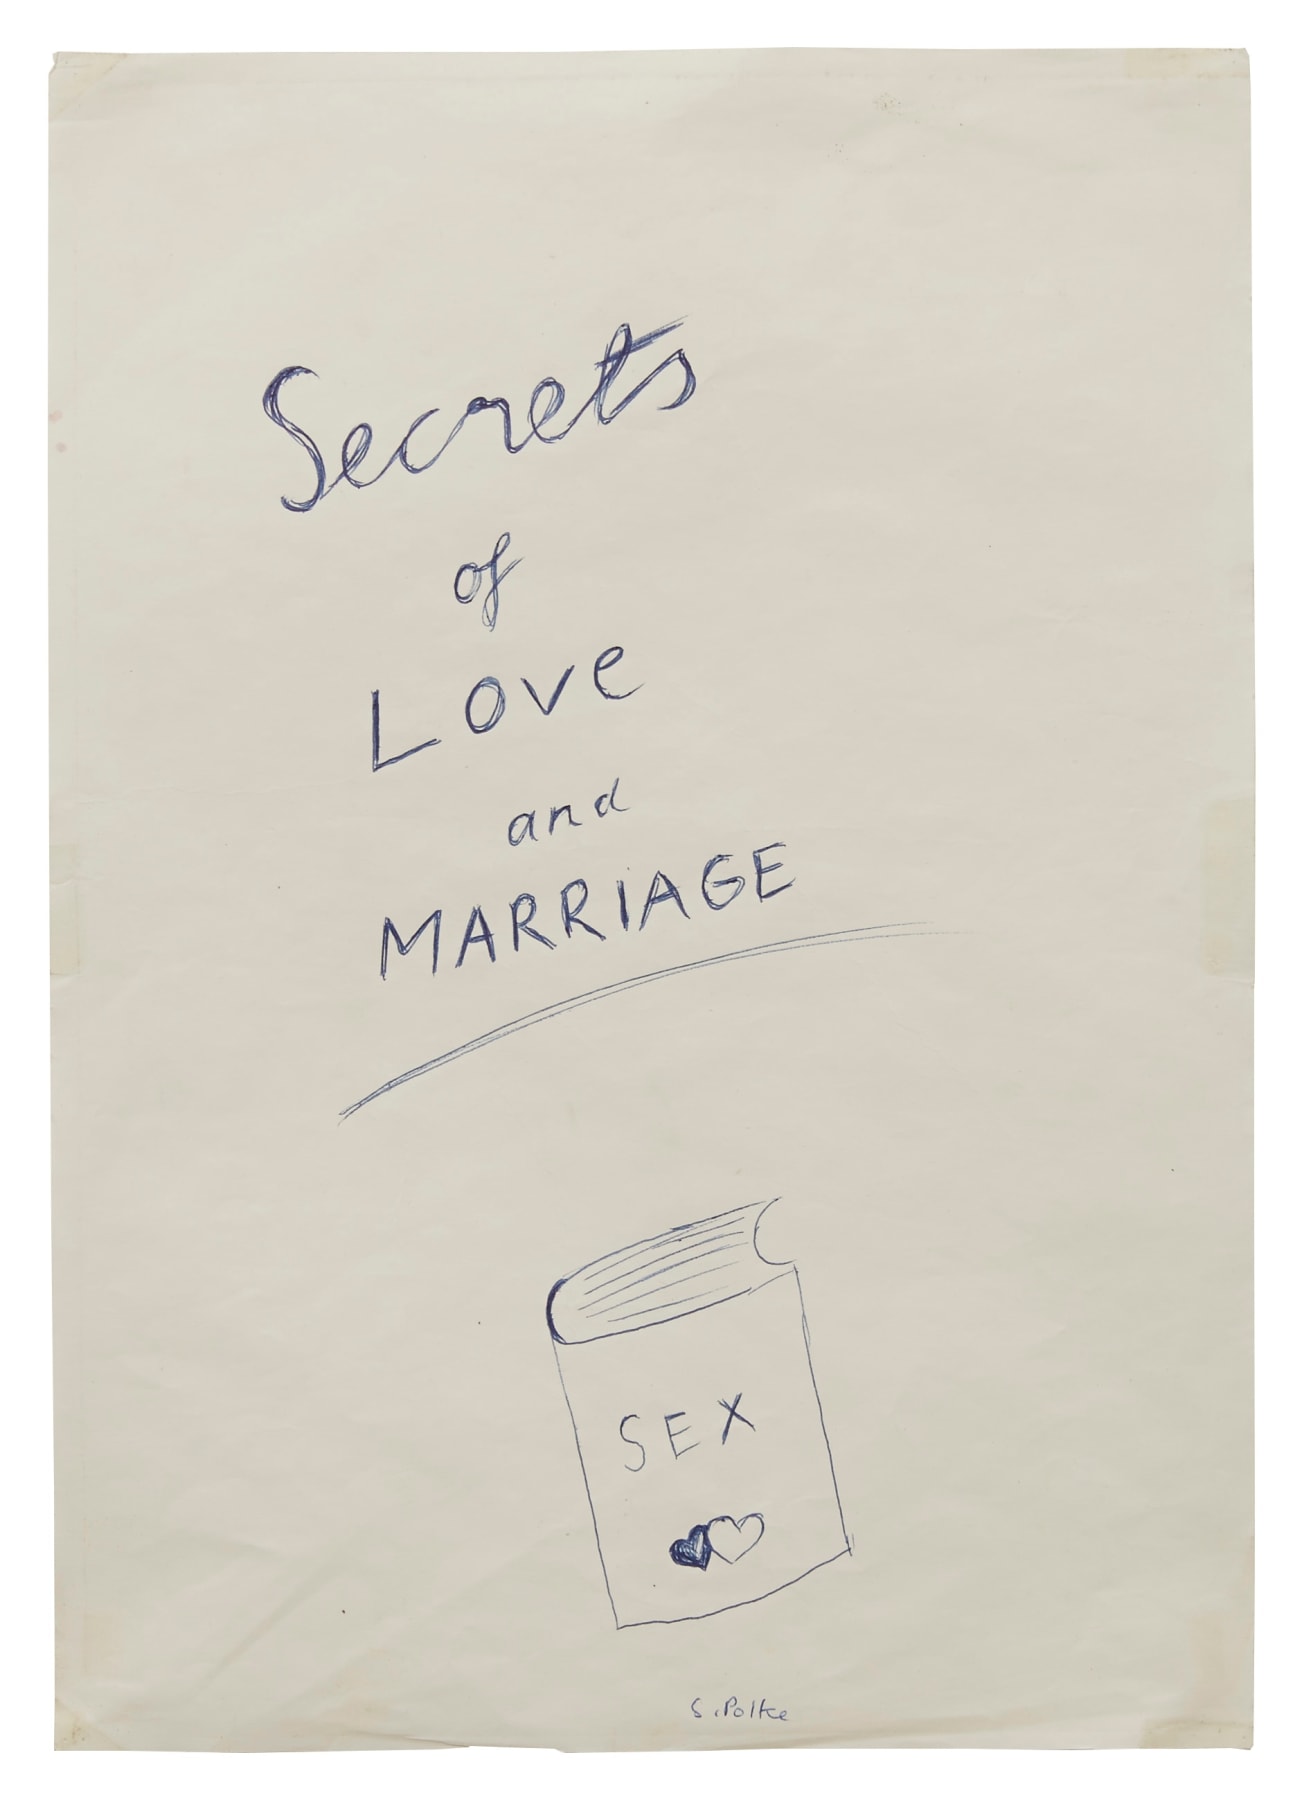 &quot;Secrets of Love and Marriage&quot;, ca. 1967-1968